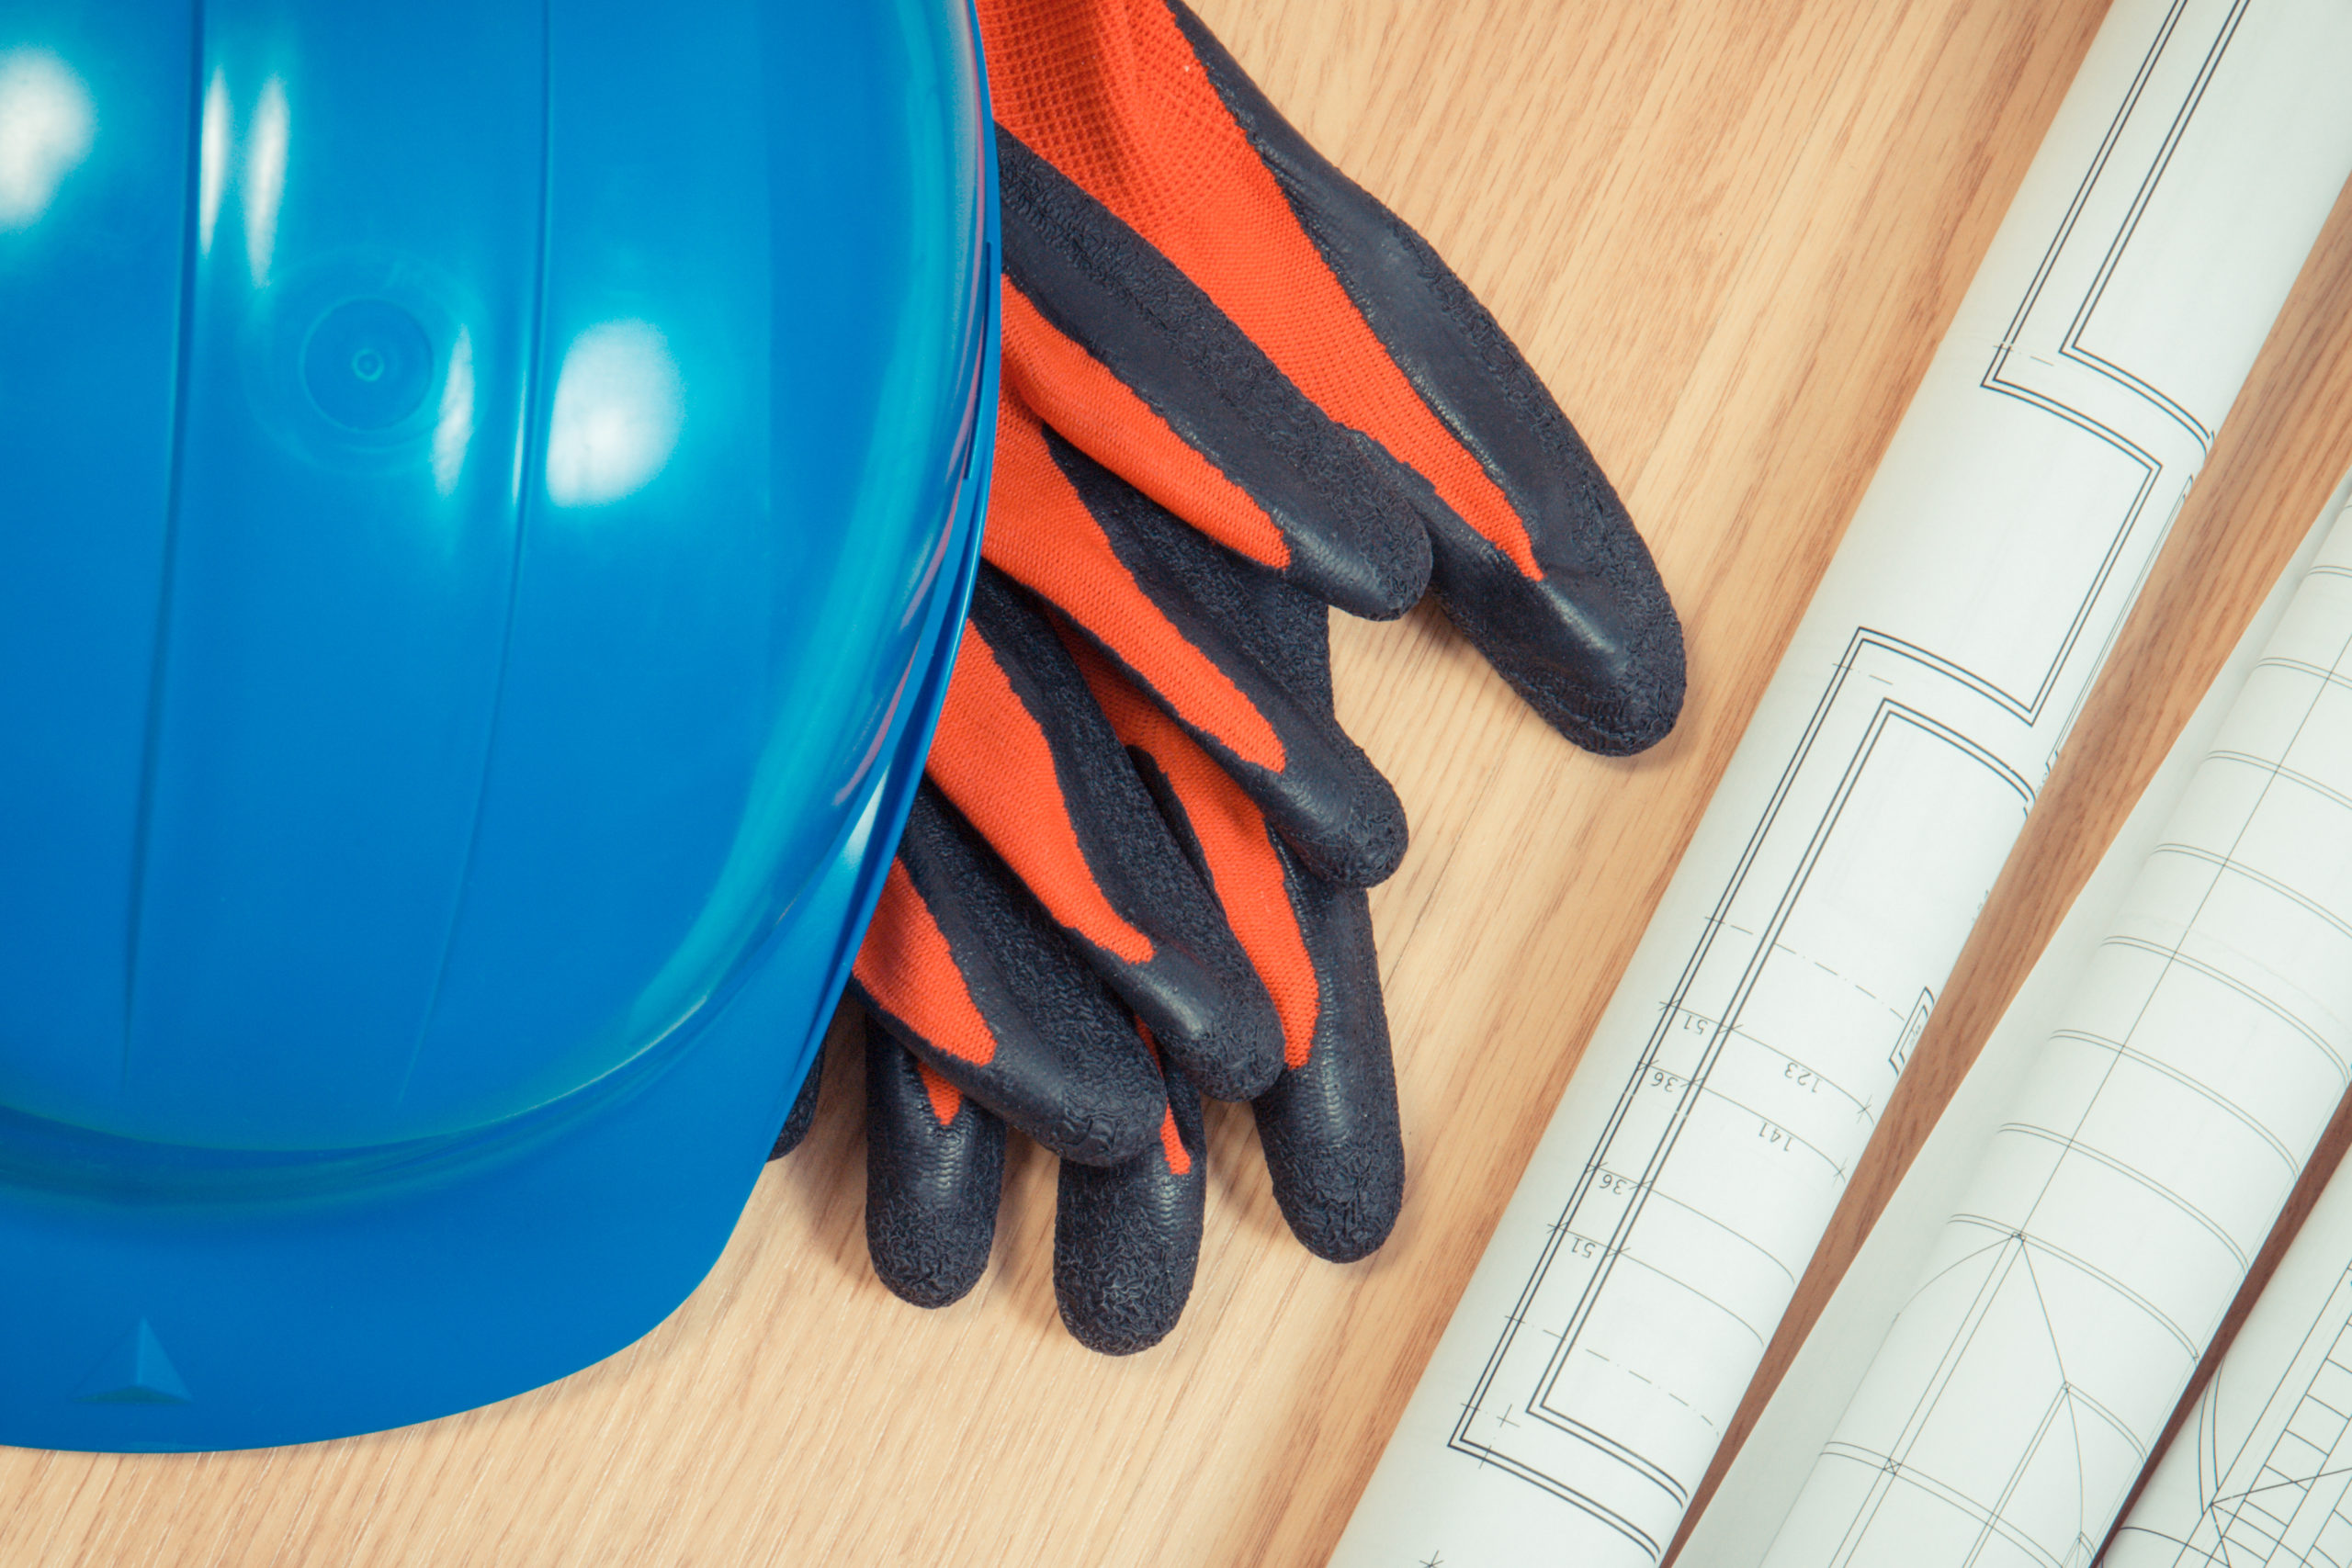 Rolls of diagrams and electrical construction drawings, protective blue helmet and gloves